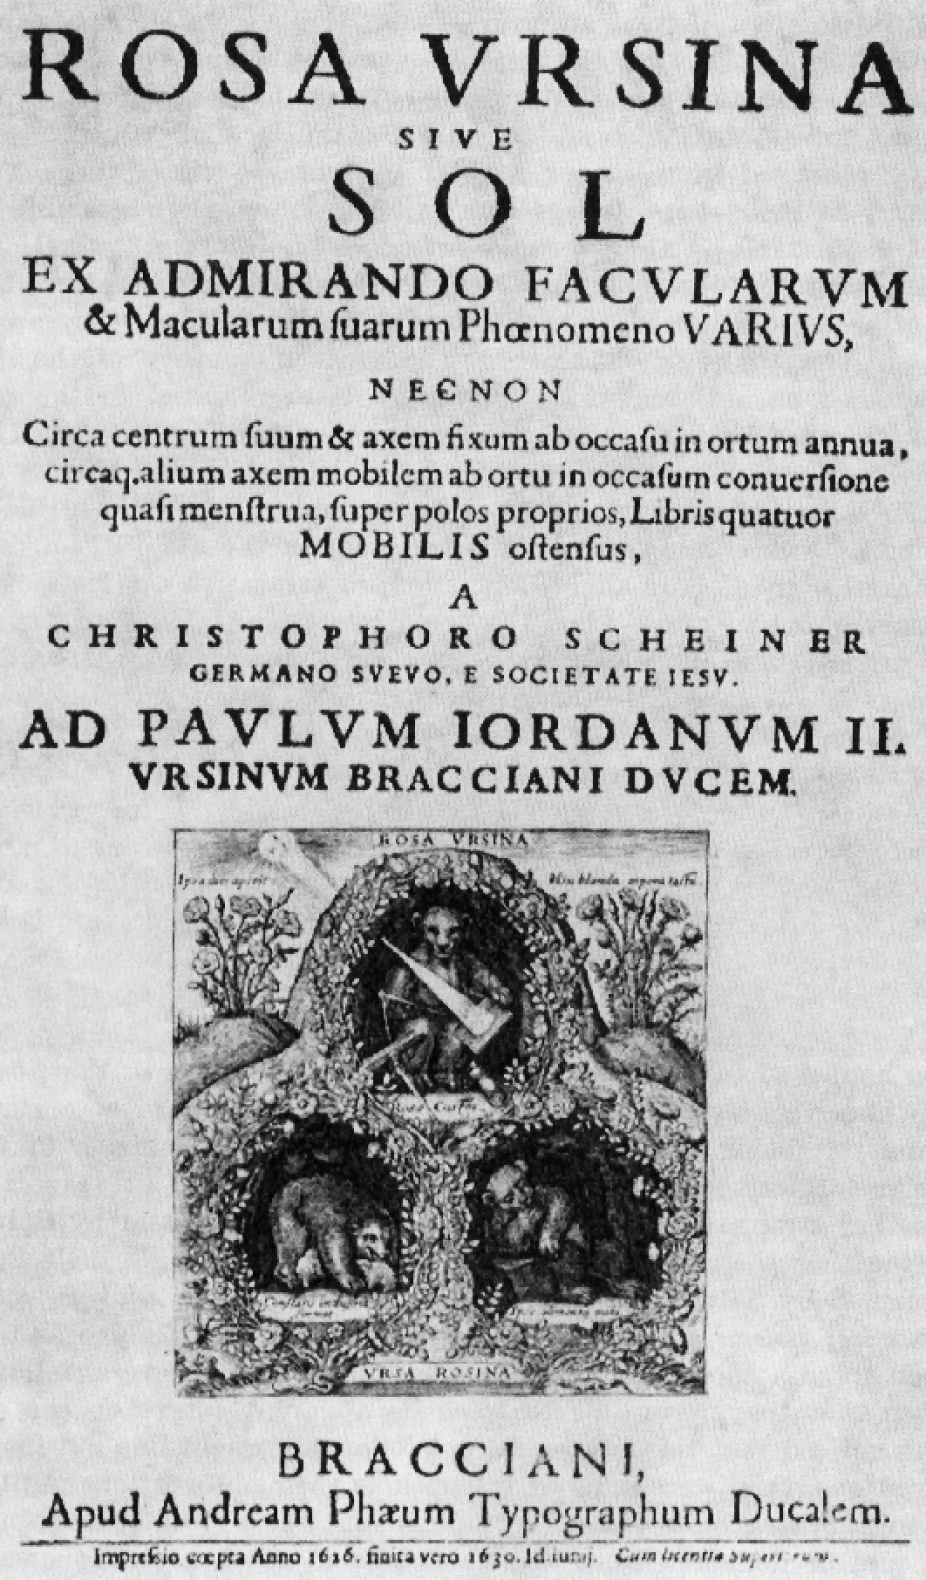 Frontispiece of Scheiner's "Rosa Ursina", published in Bracciano between 1626 and 1630